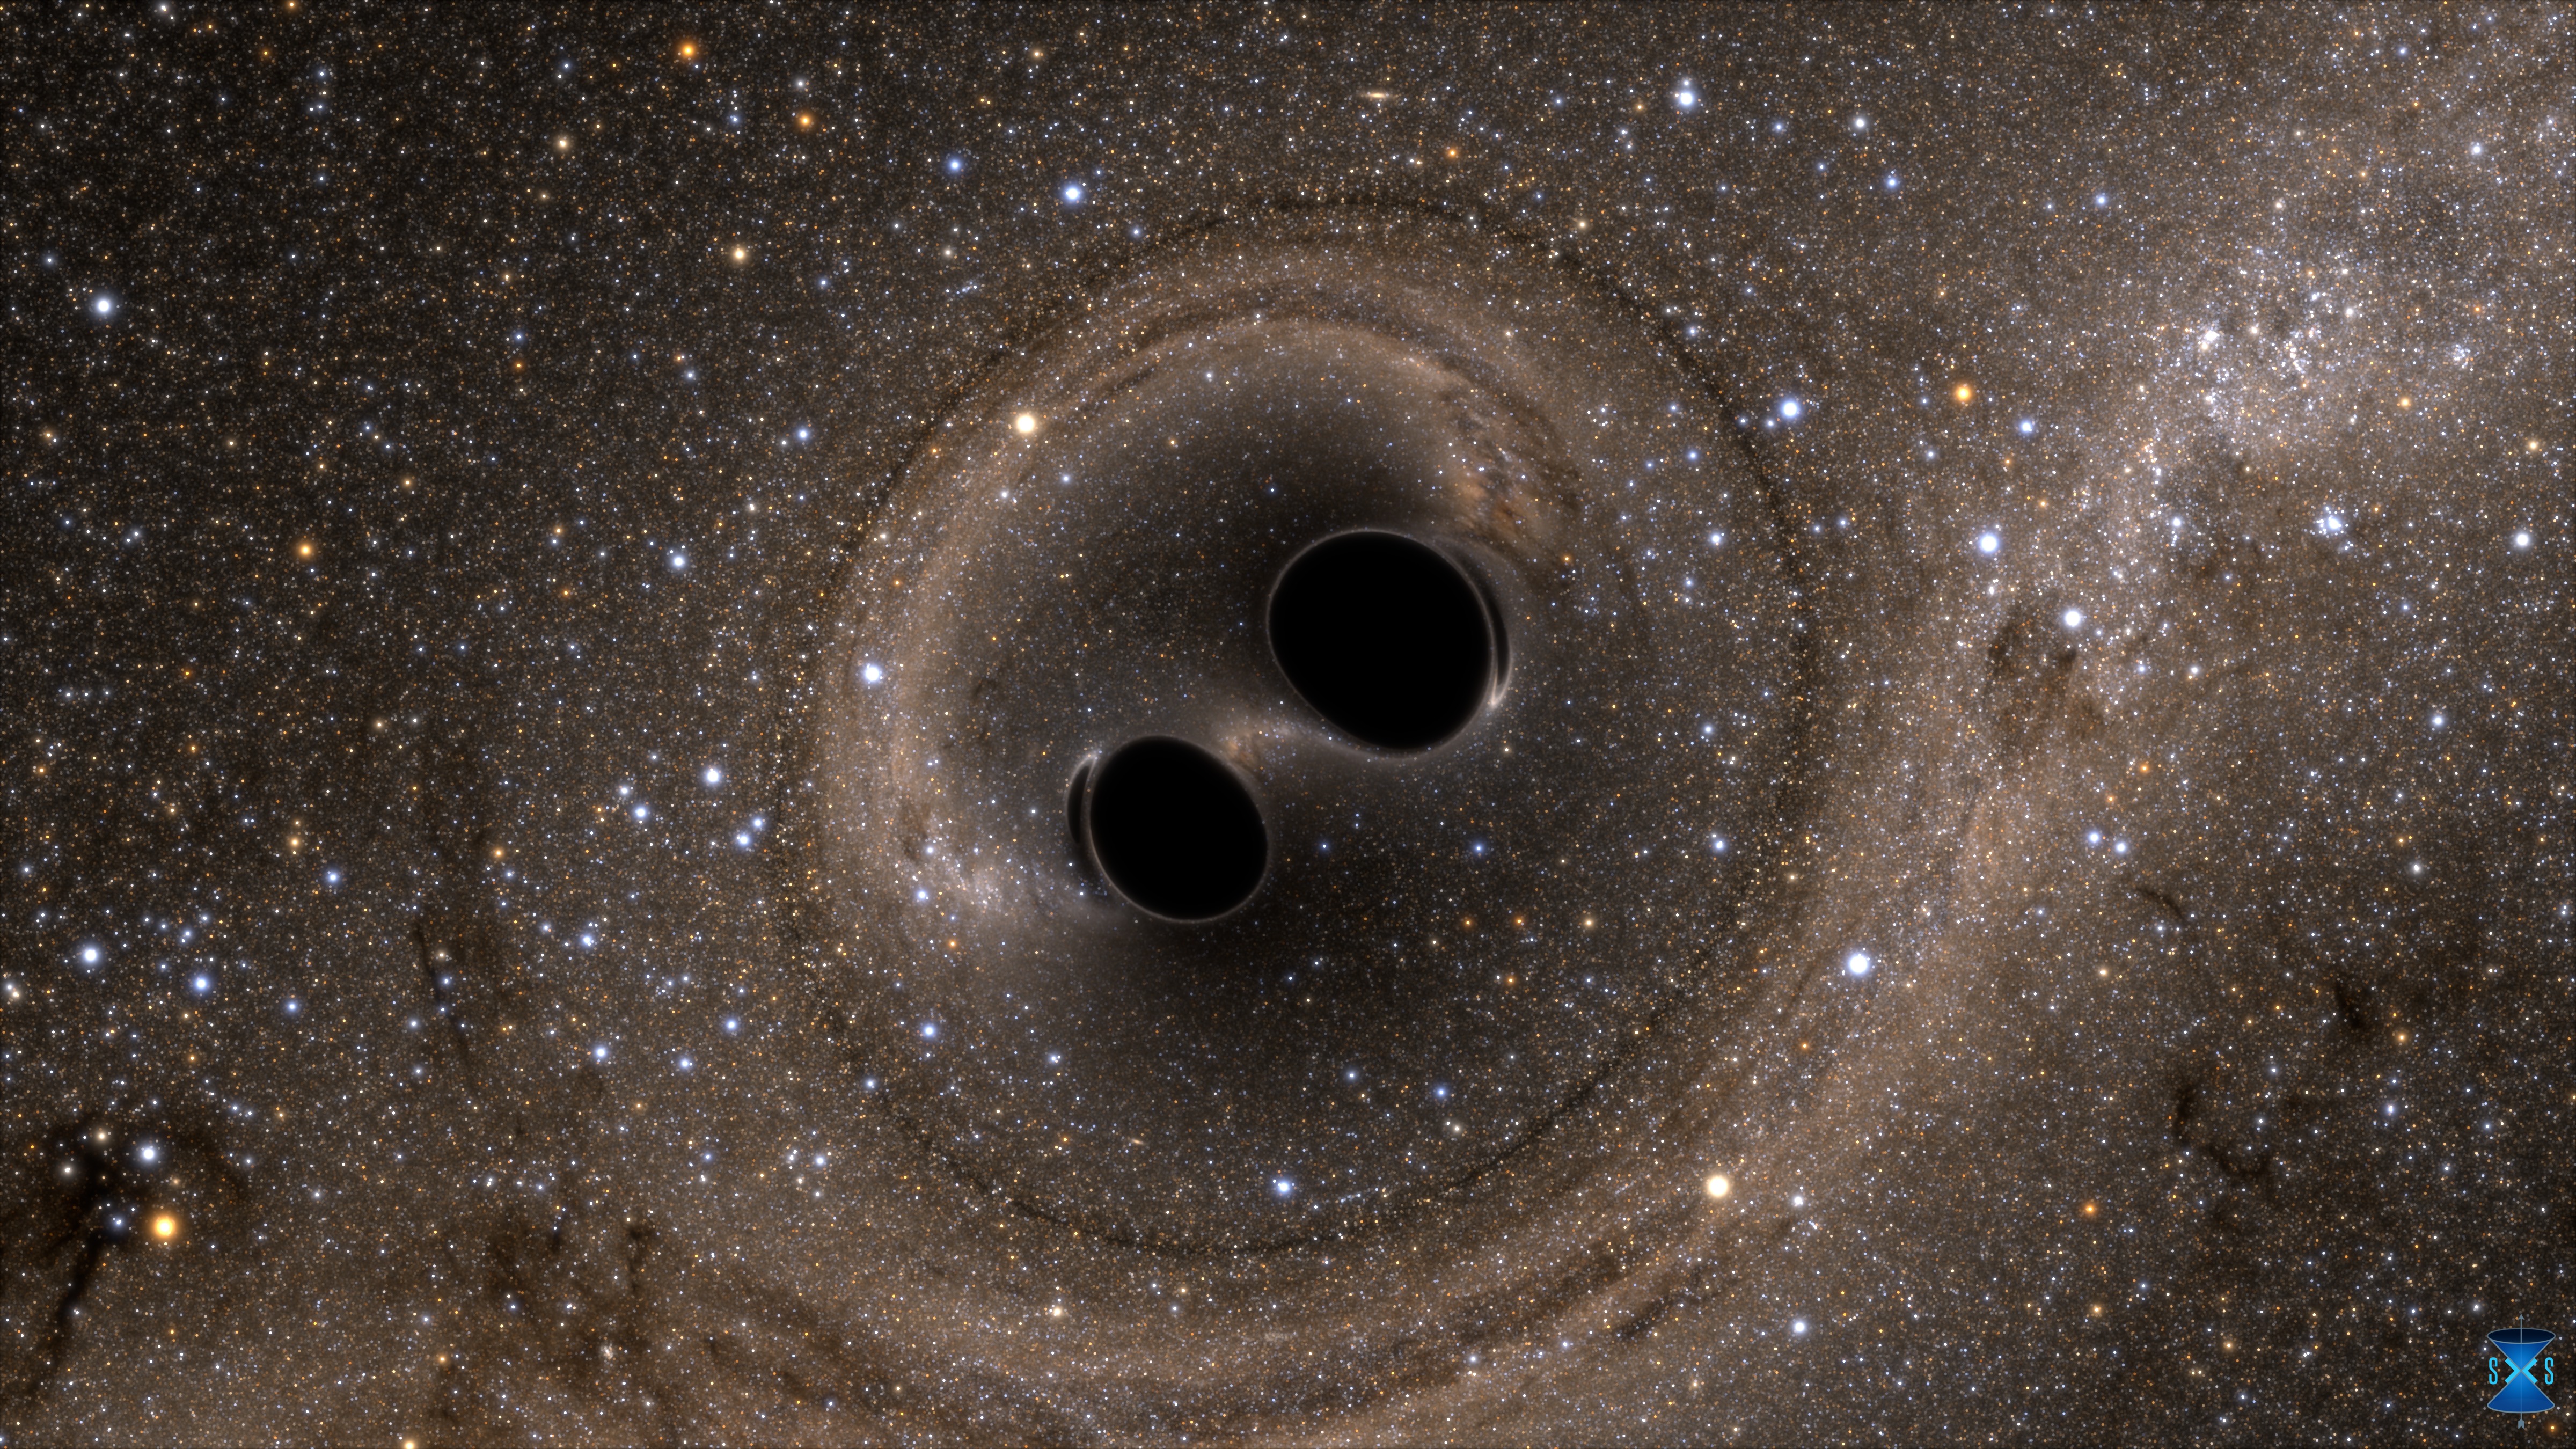 The collision of two black holes—a tremendously powerful event detected for the first time ever by the Laser Interferometer Gravitational-Wave Observatory, or LIGO on September 14, 2015—is seen in this still from a computer simulation. LIGO detected gravitational waves, or ripples in space and time generated as the black holes spiraled in toward each other, collided, and merged. This simulation shows how the merger would appear to human eyes. It was created by solving equations from Albert Einstein's general theory of relativity using the LIGO data. Illustration: SXS. (Click image to download hi-res version.)